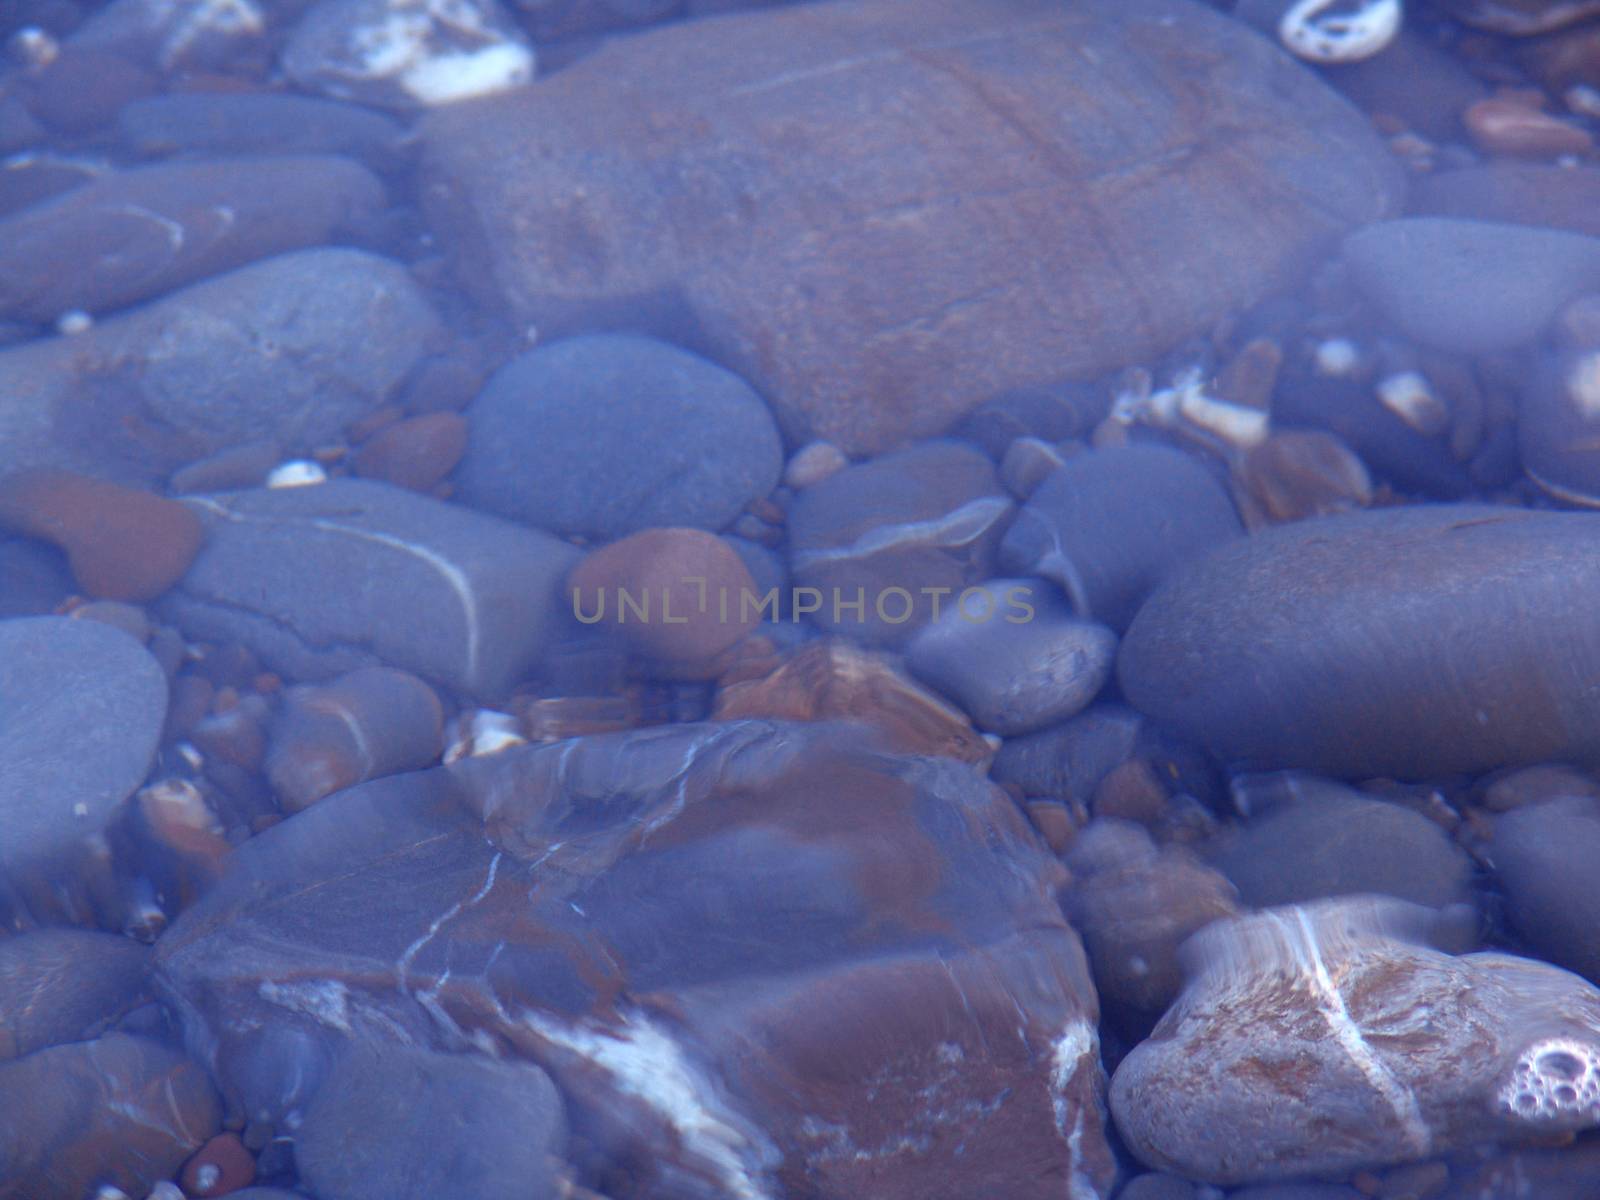 Pebbles seen through clear water. Usable as background